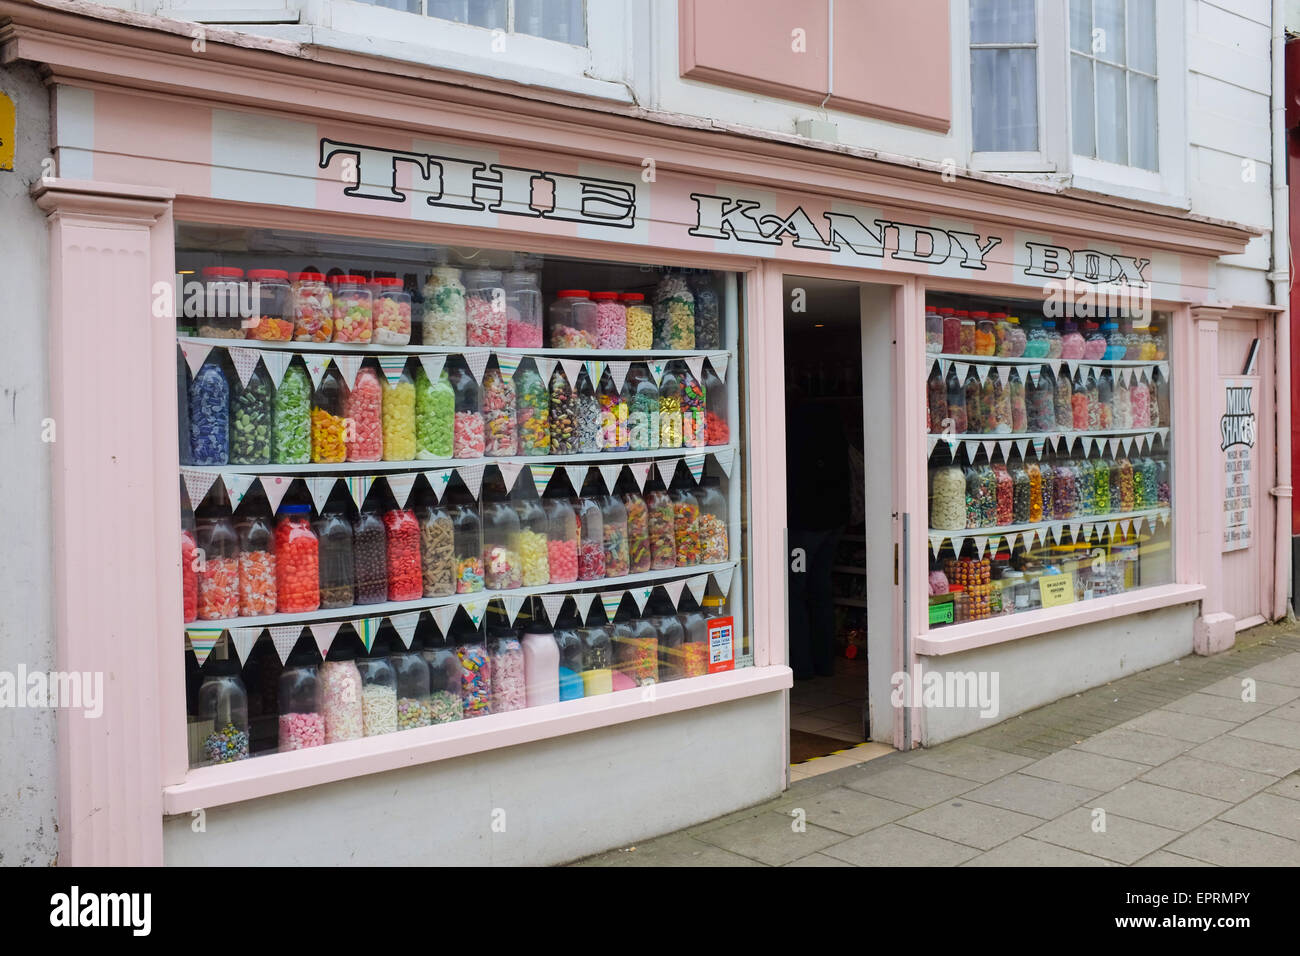 A traditional sweet shop in Ryde, Isle of Wight, England. Stock Photo